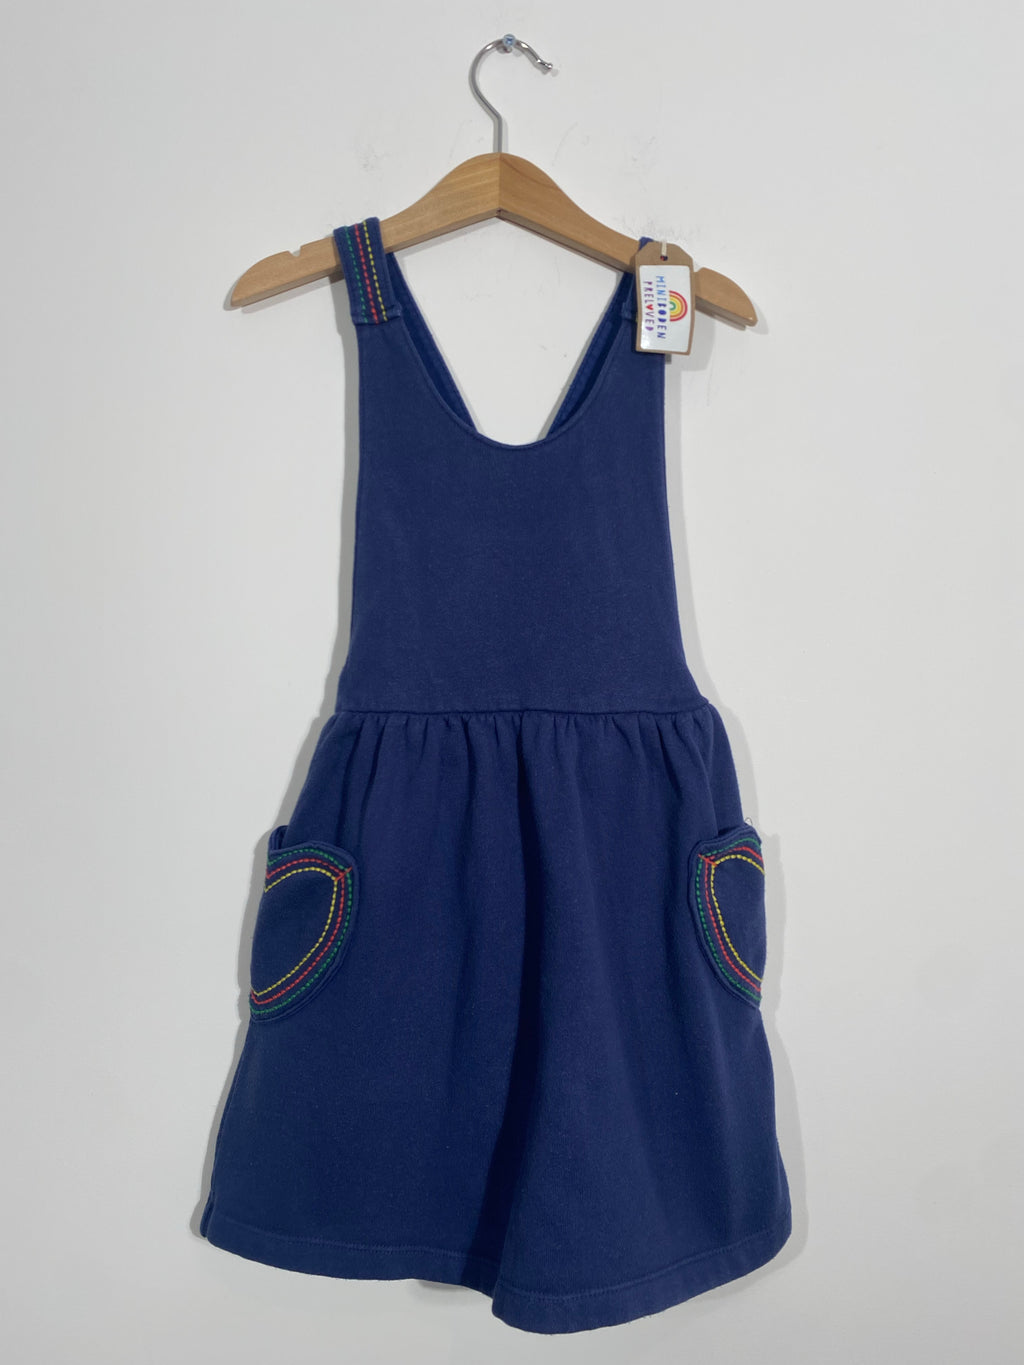 Blue Jumper Style Pinafore Dress With Heart Pockets (4-5 Years)